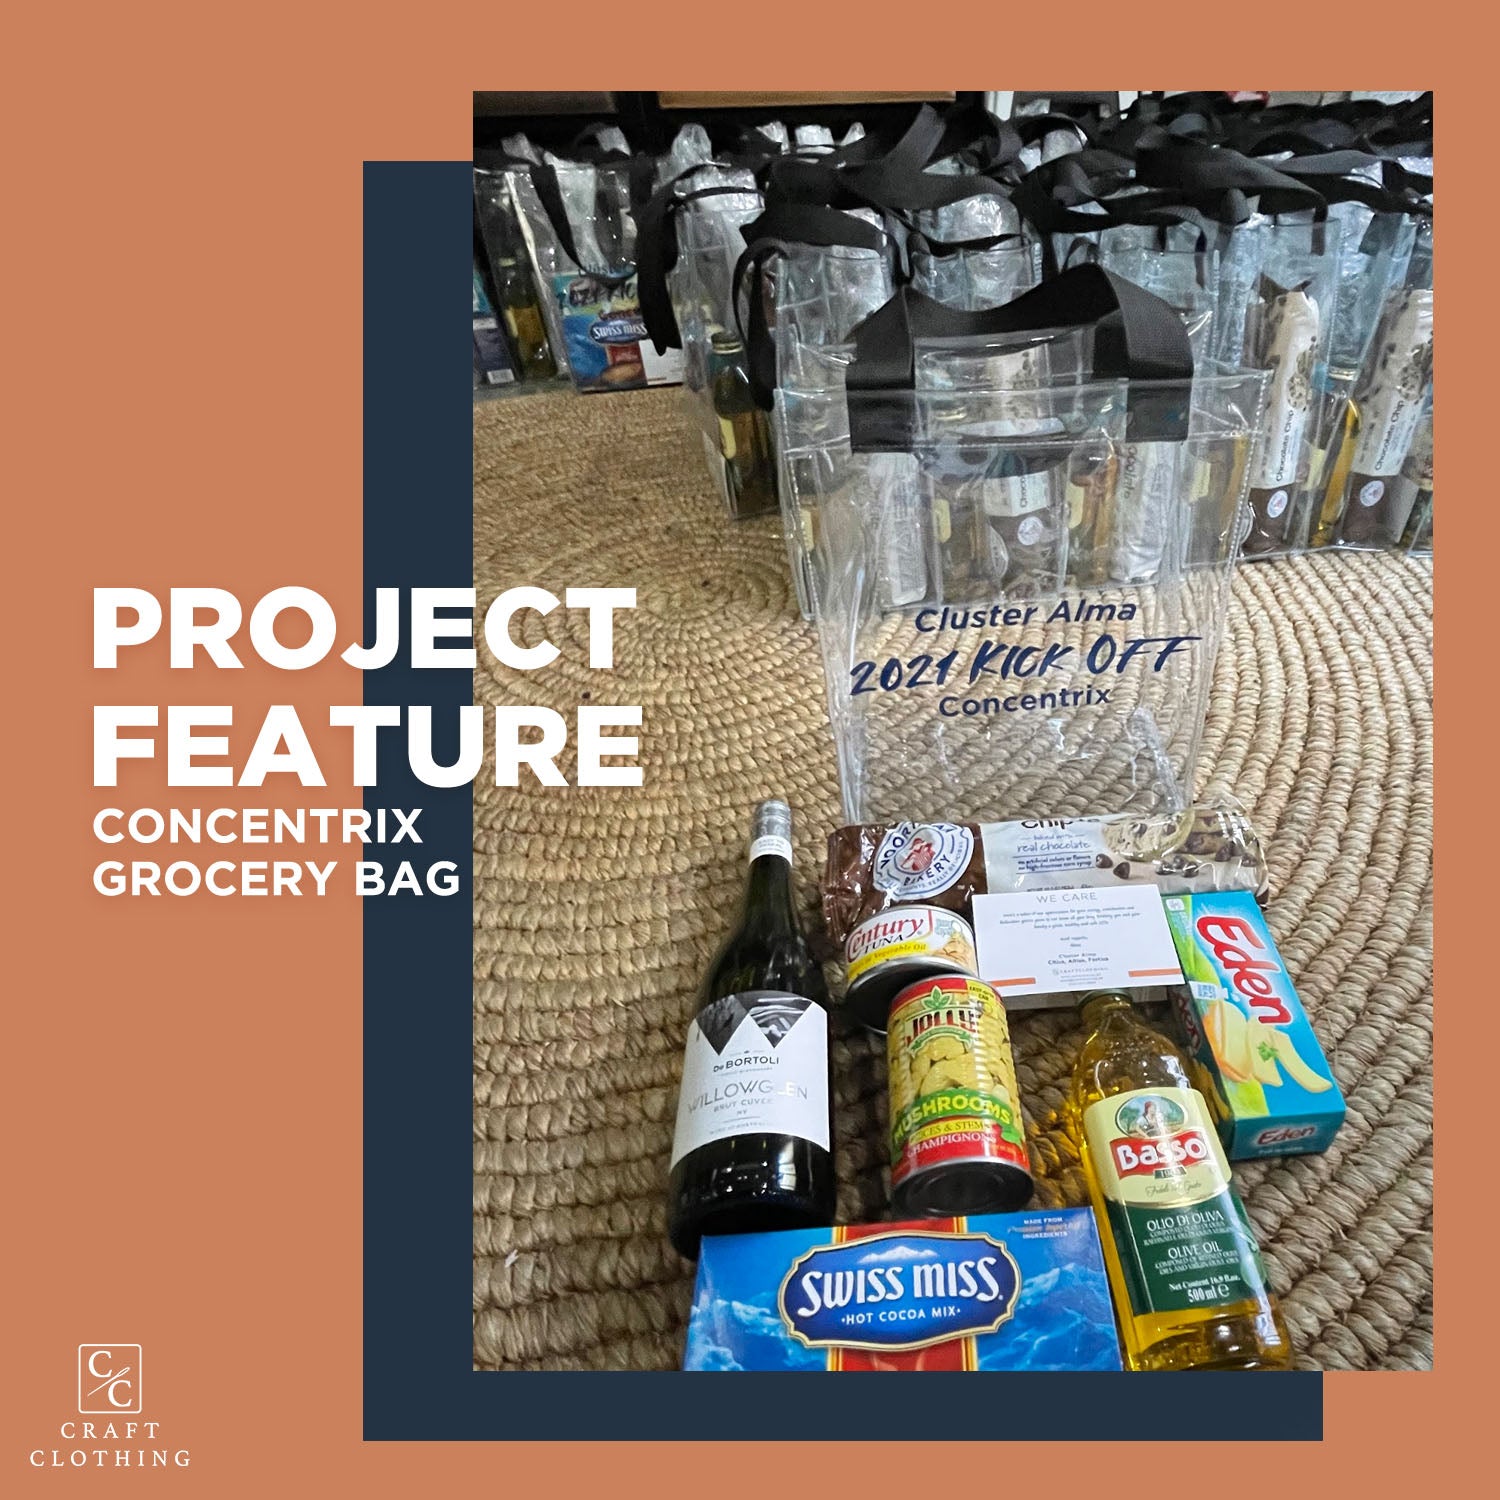 Project Feature: Concentrix Grocery Bag